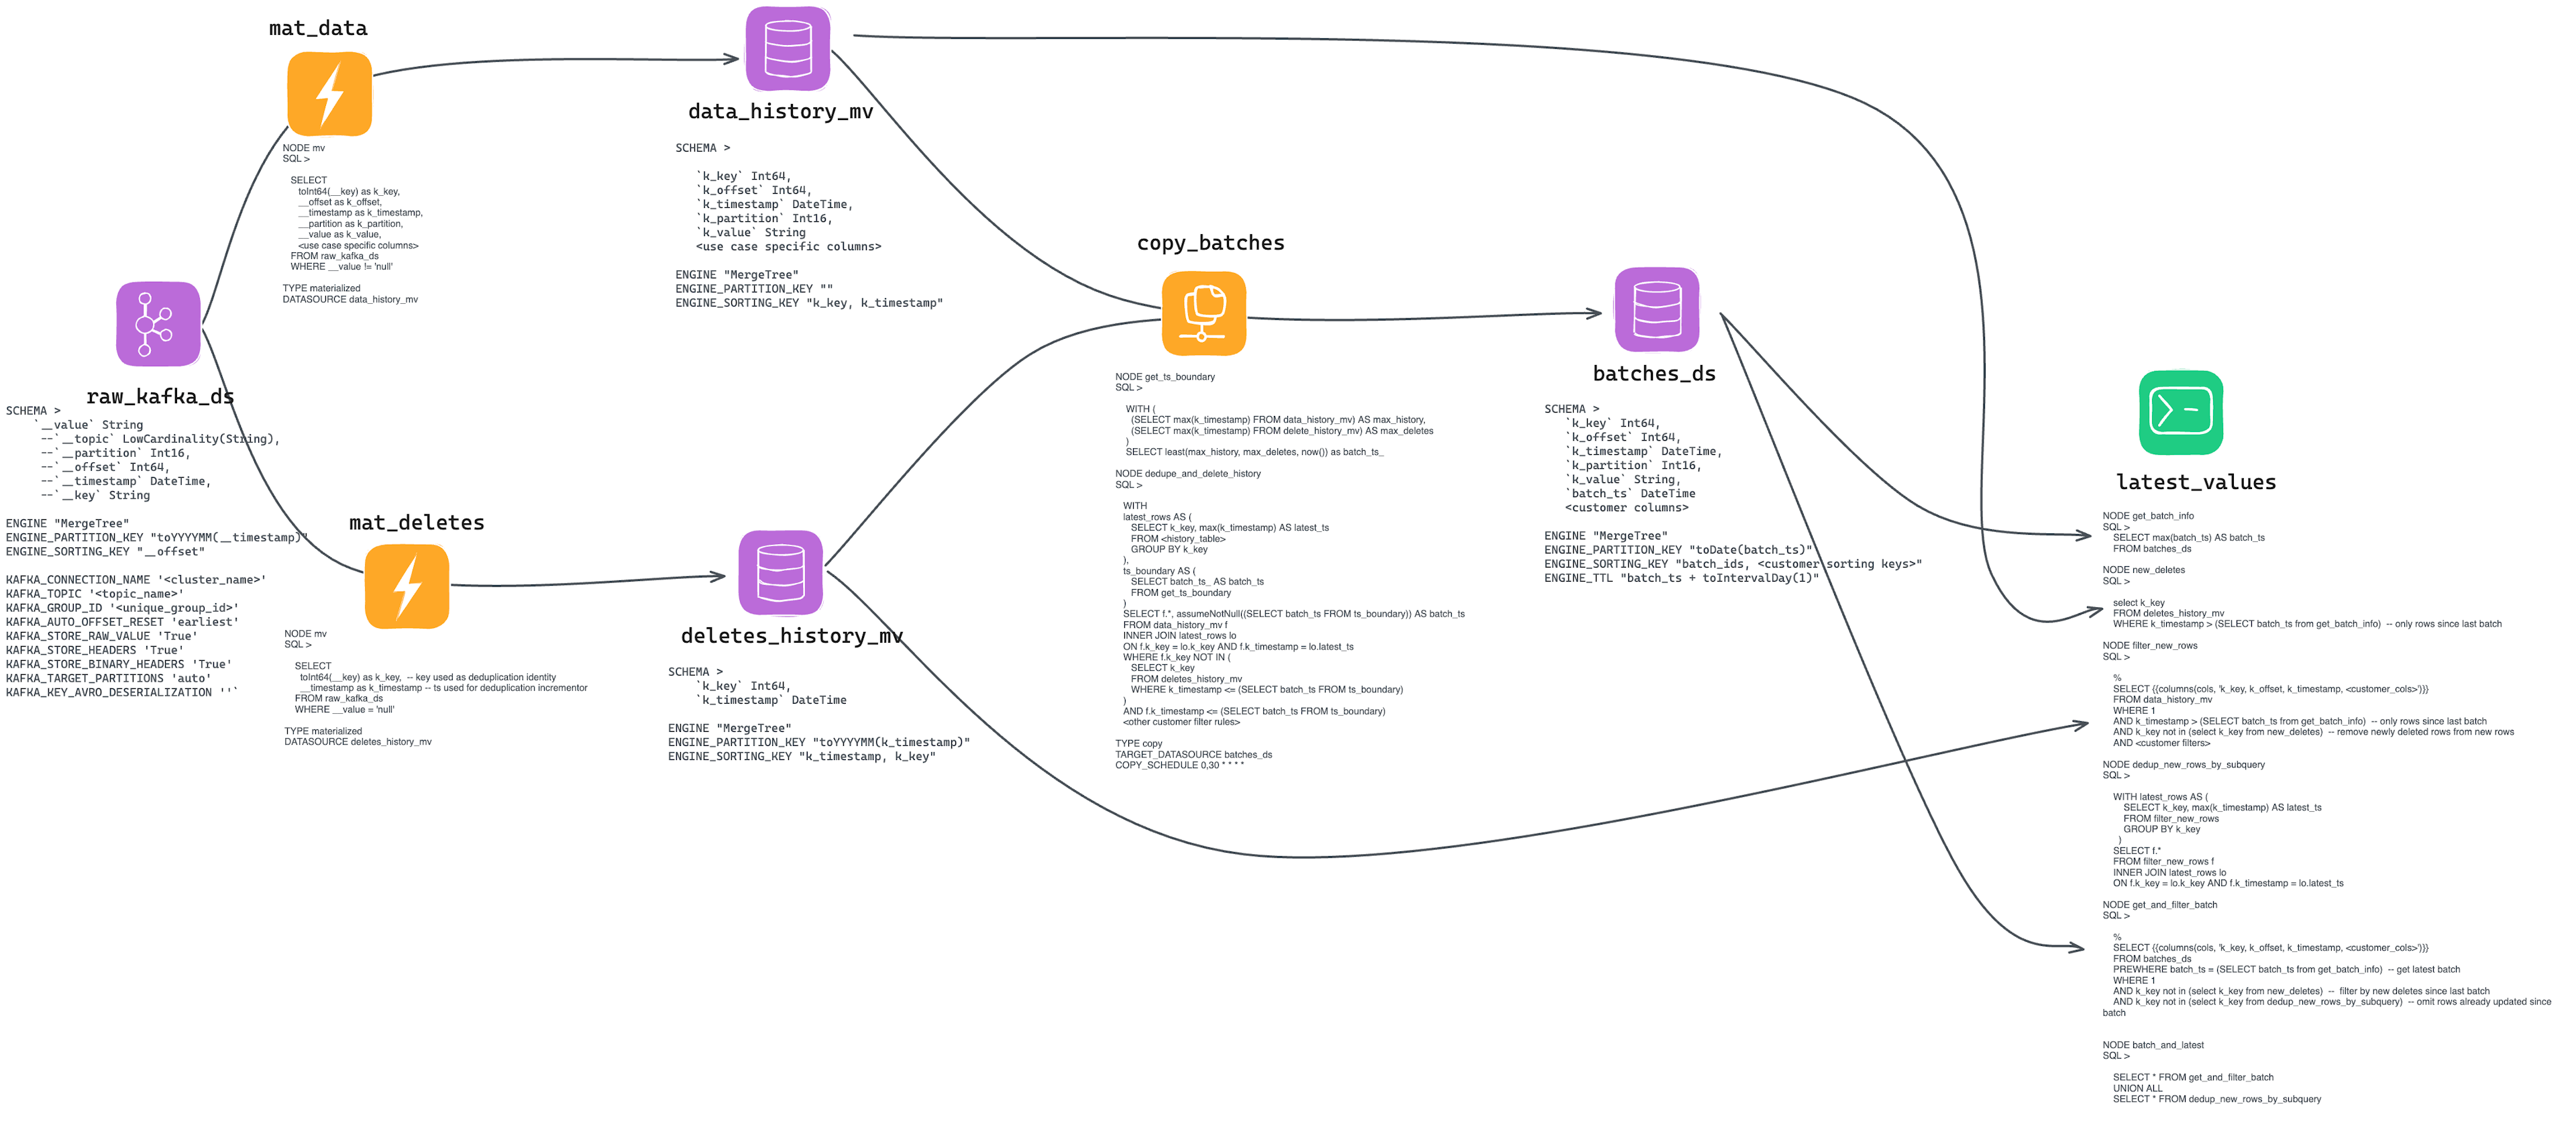 An overview of the data flow, with a Kafka Data Source, two Materialized Views to keep track of changes and deletes, a Copy Pipe to deduplicate in batches, and a Pipe to combine all Data Sources